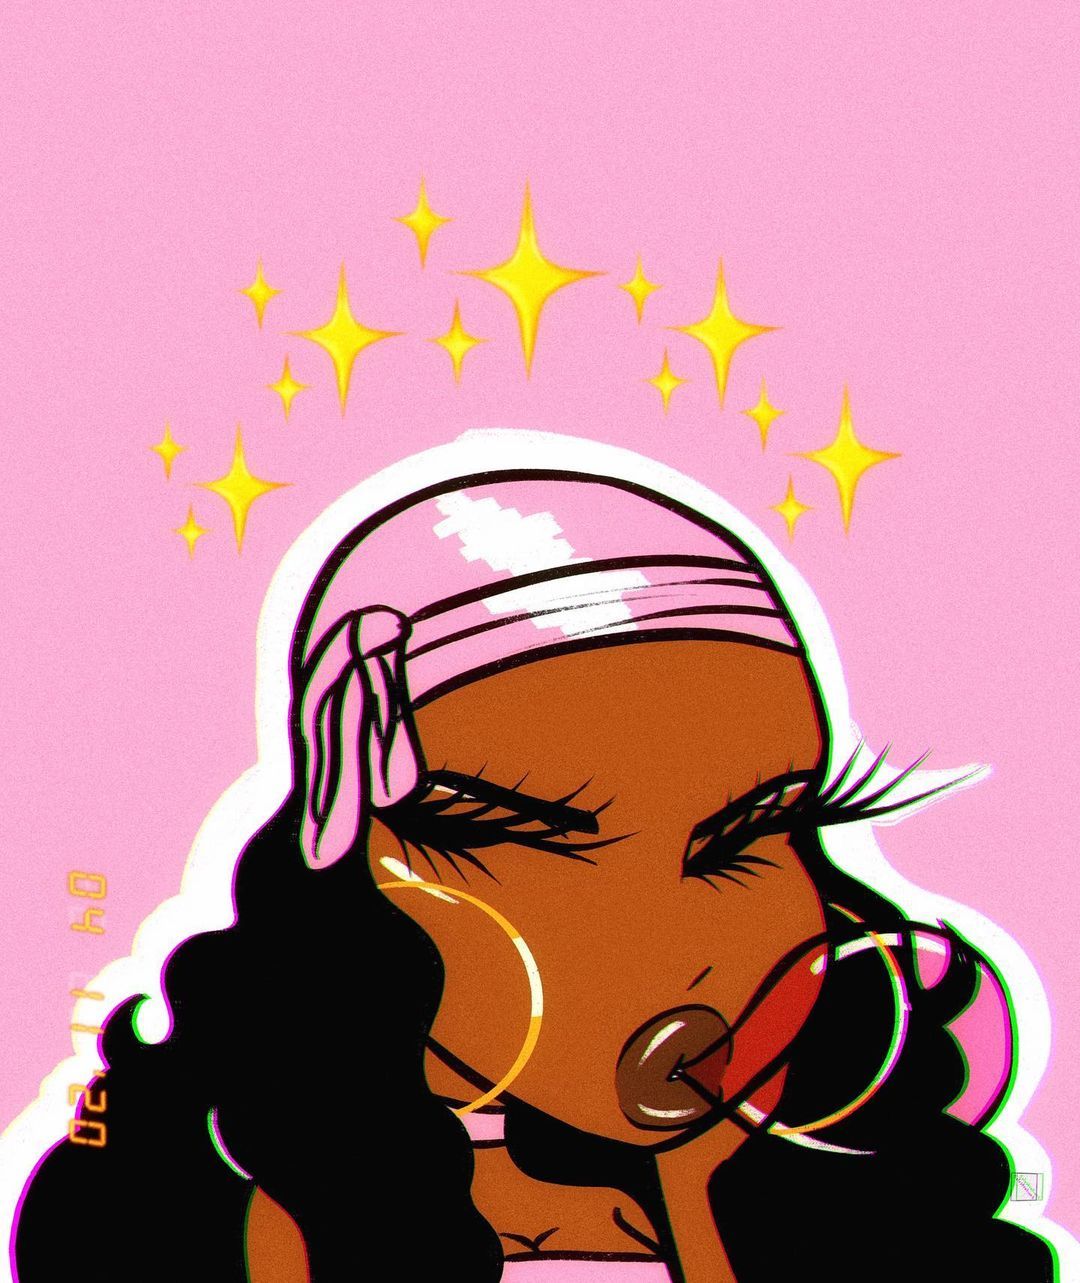 Illustration of a black woman with a pink bandana and gold earrings, staring off into the distance with a contemplative expression. She is wearing a pink shirt and has gold hoops in her ears. There are yellow stars behind her head. - Baddie, Bratz